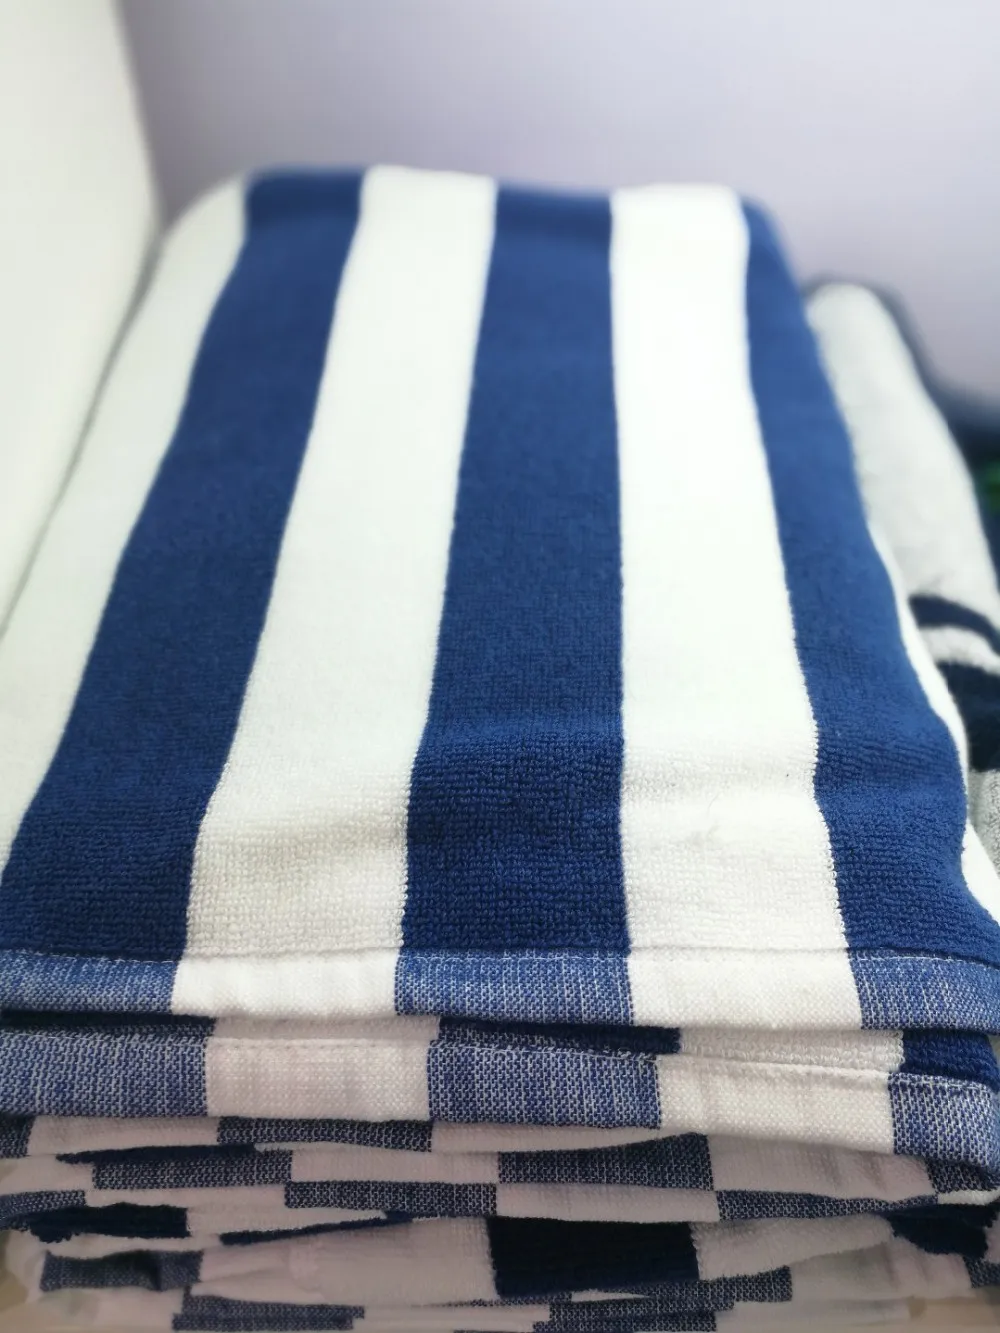 100% Cotton Blue And White Striped Beach Towels - Buy Striped Beach ...